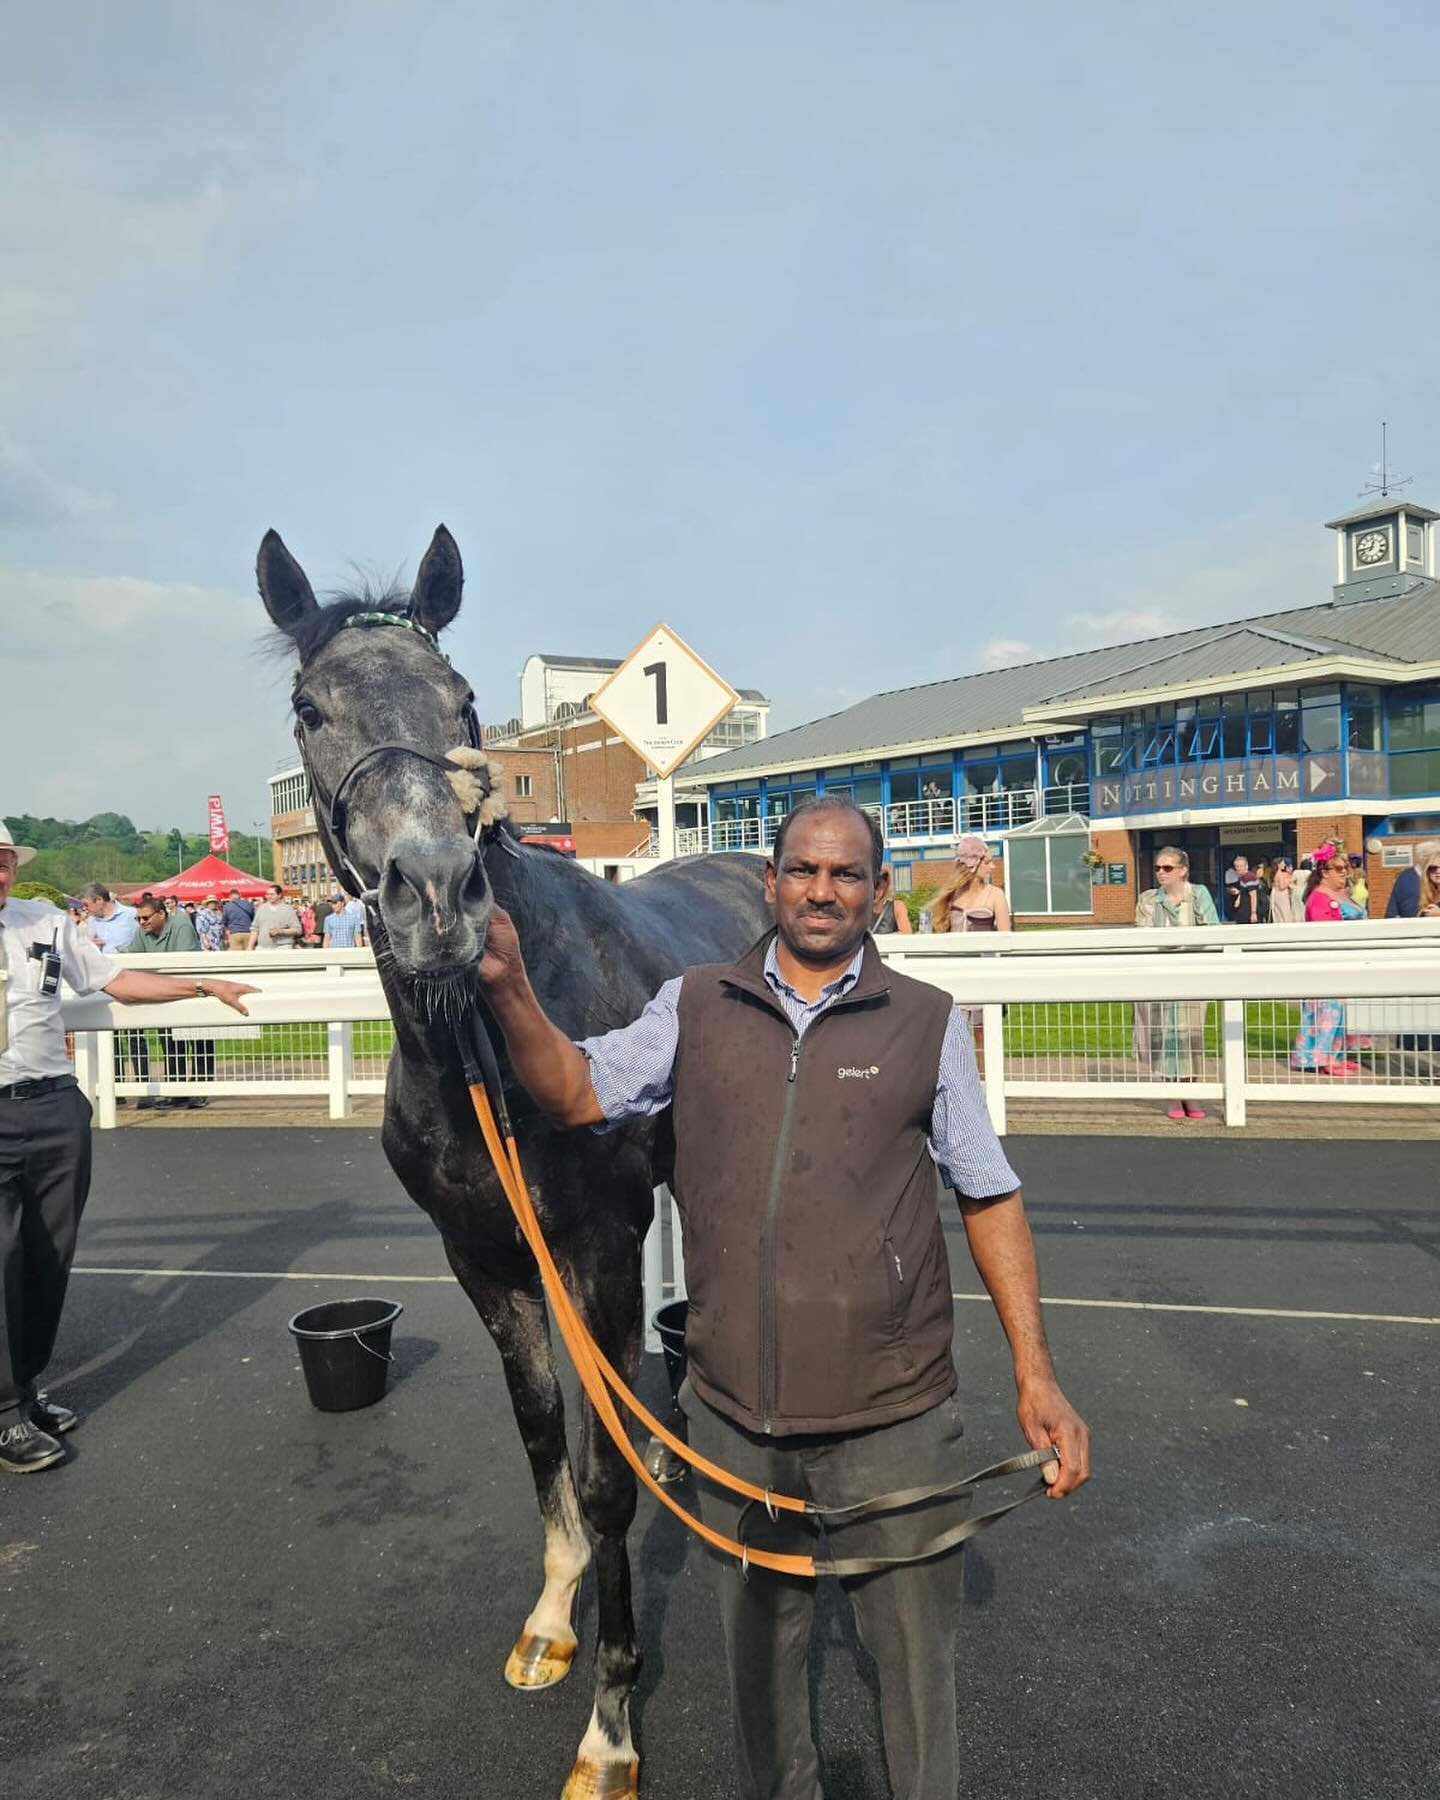 🏆🐎🏆 Capping off a successful week with a double winner today! 

RUKAANA (pic 1) shines with a fantastic win, from last to first, under a great ride by @chrishowarth01 at @nottingham_racecourse for @ziadgaladari 👏

And 

SOCIALITE (pic 2) claims v